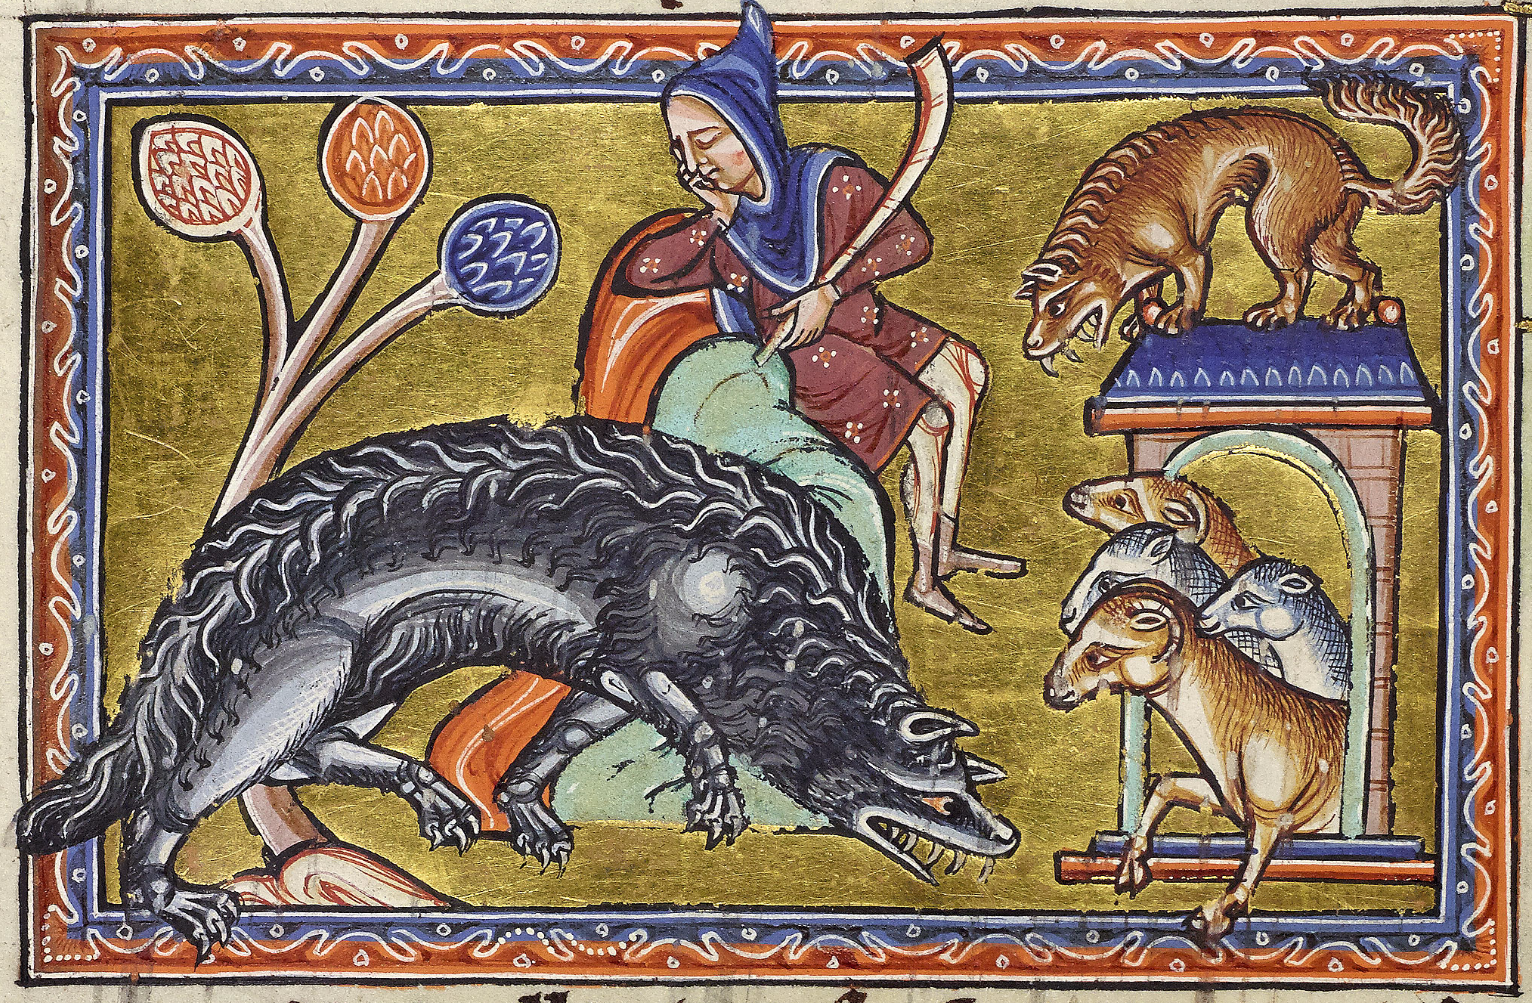 Medieval illumination of a man with a club looking down at a black wolf, with a dog and horses to the side